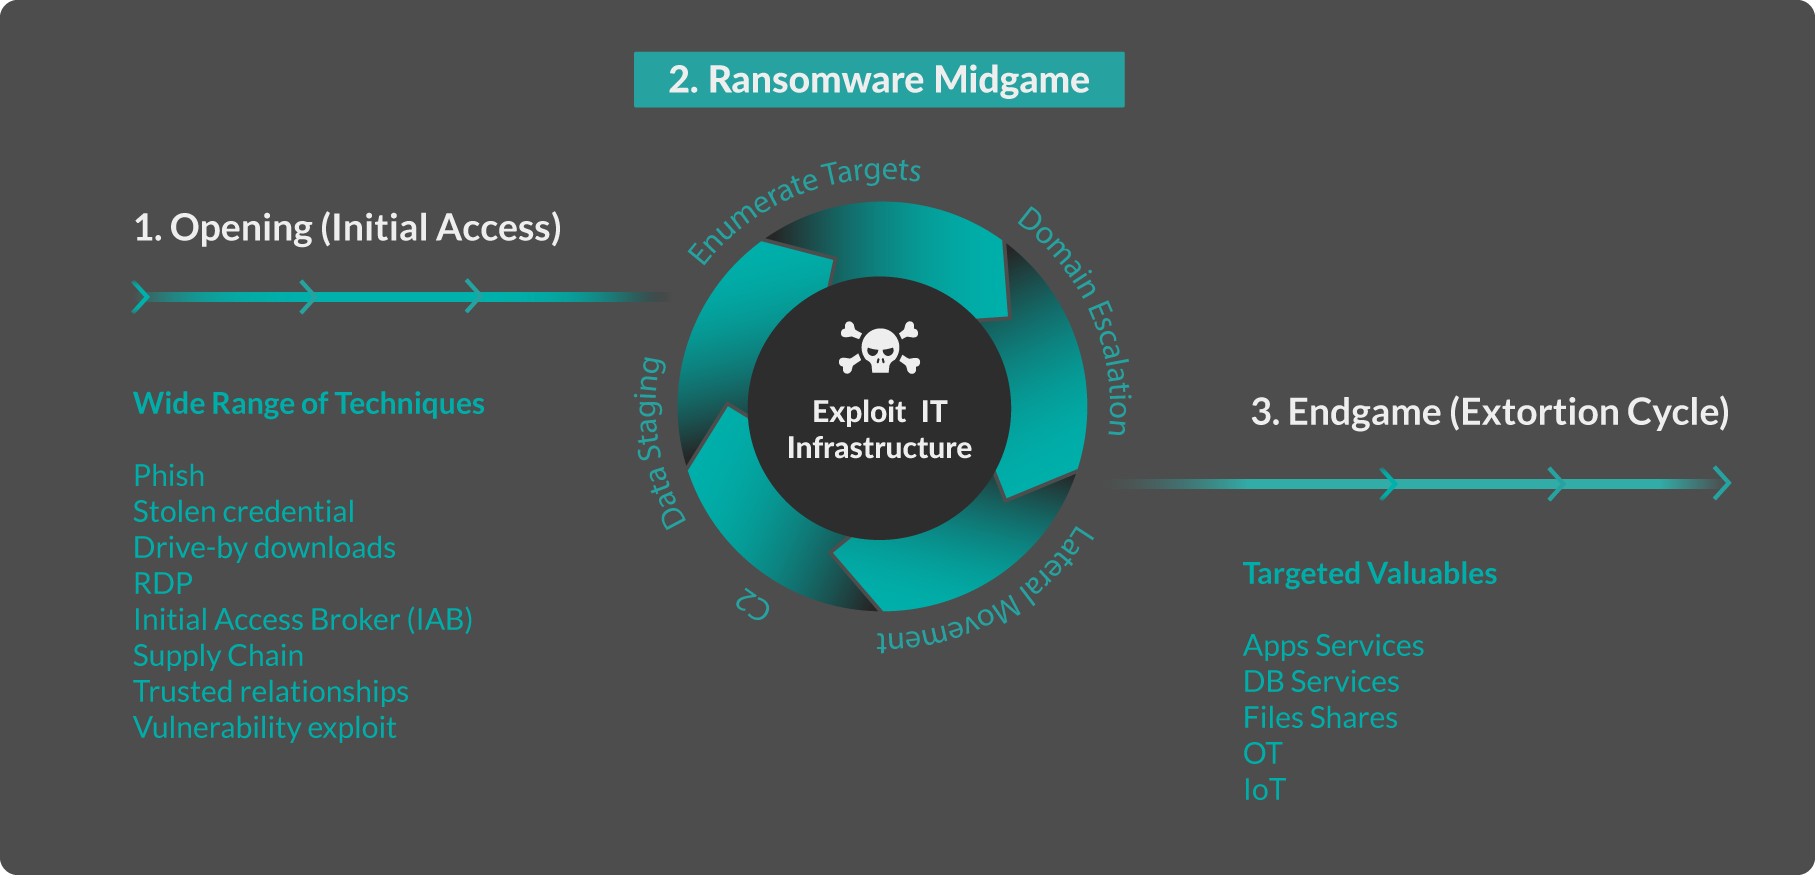 Three stages of the ransomware playbook